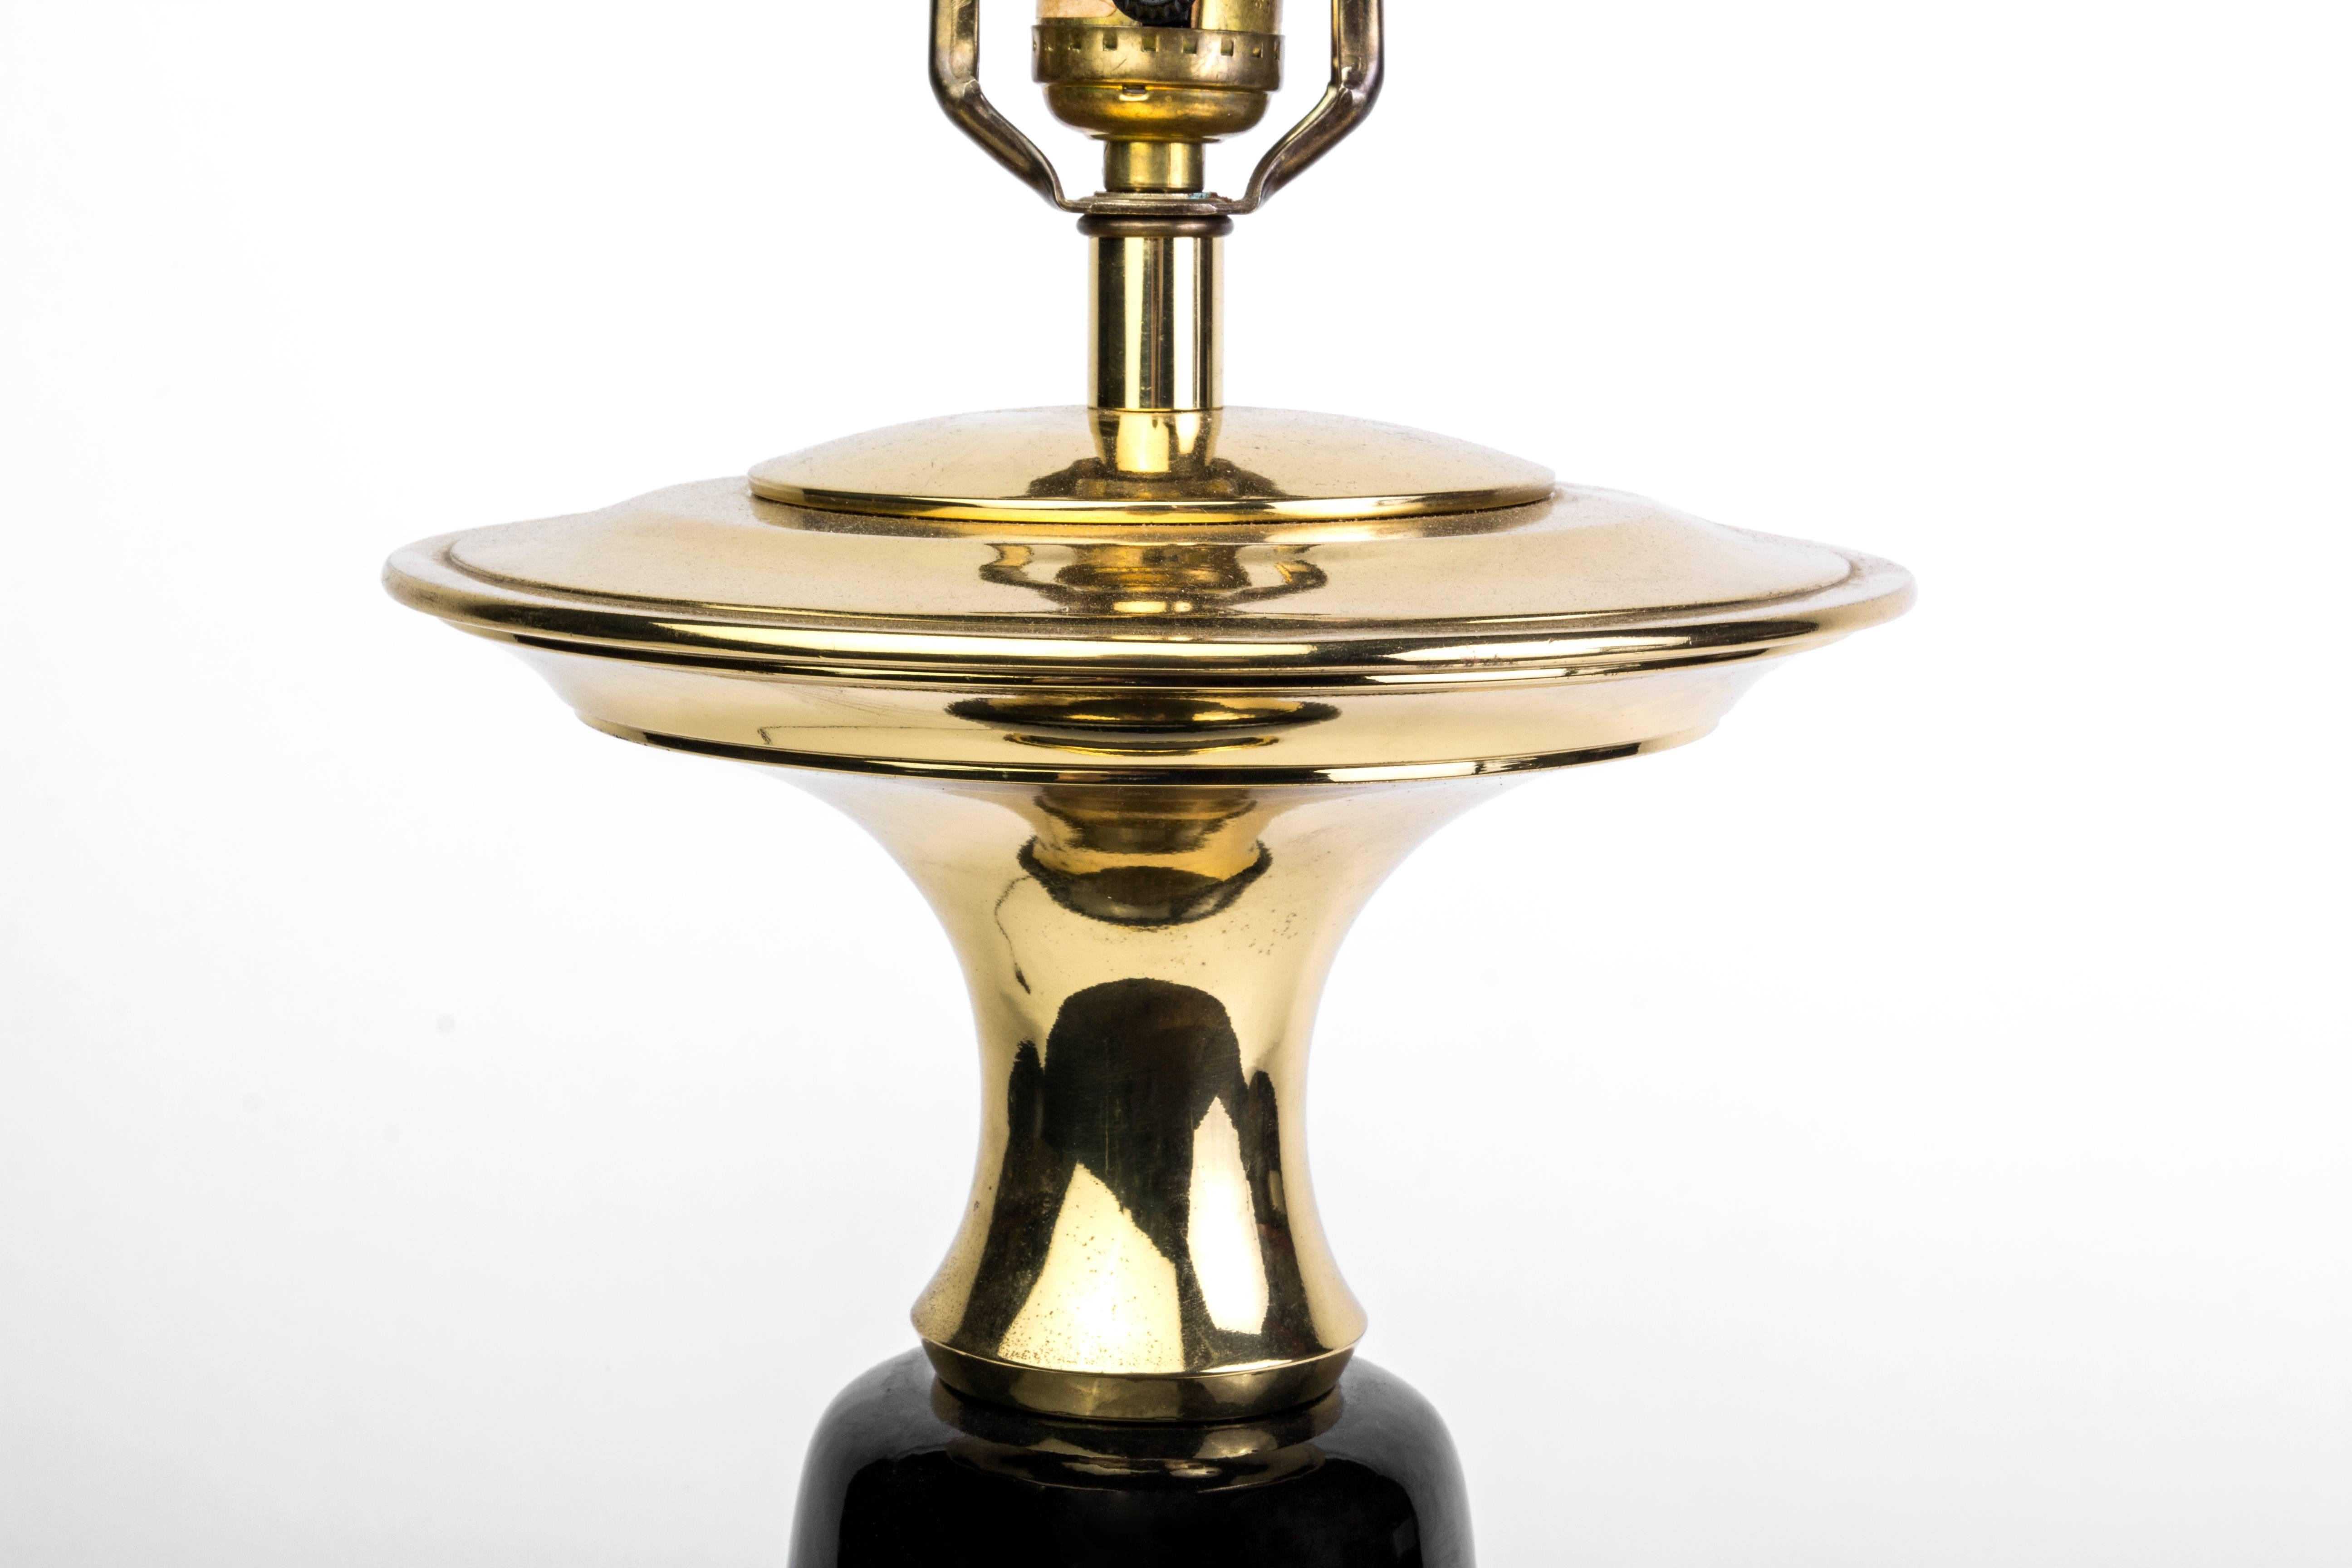 This beautiful Art Deco style table lamp was designed by Chapman. It features brass and black ceramic detailing giving it a gorgeous luster. It is in excellent vintage condition.